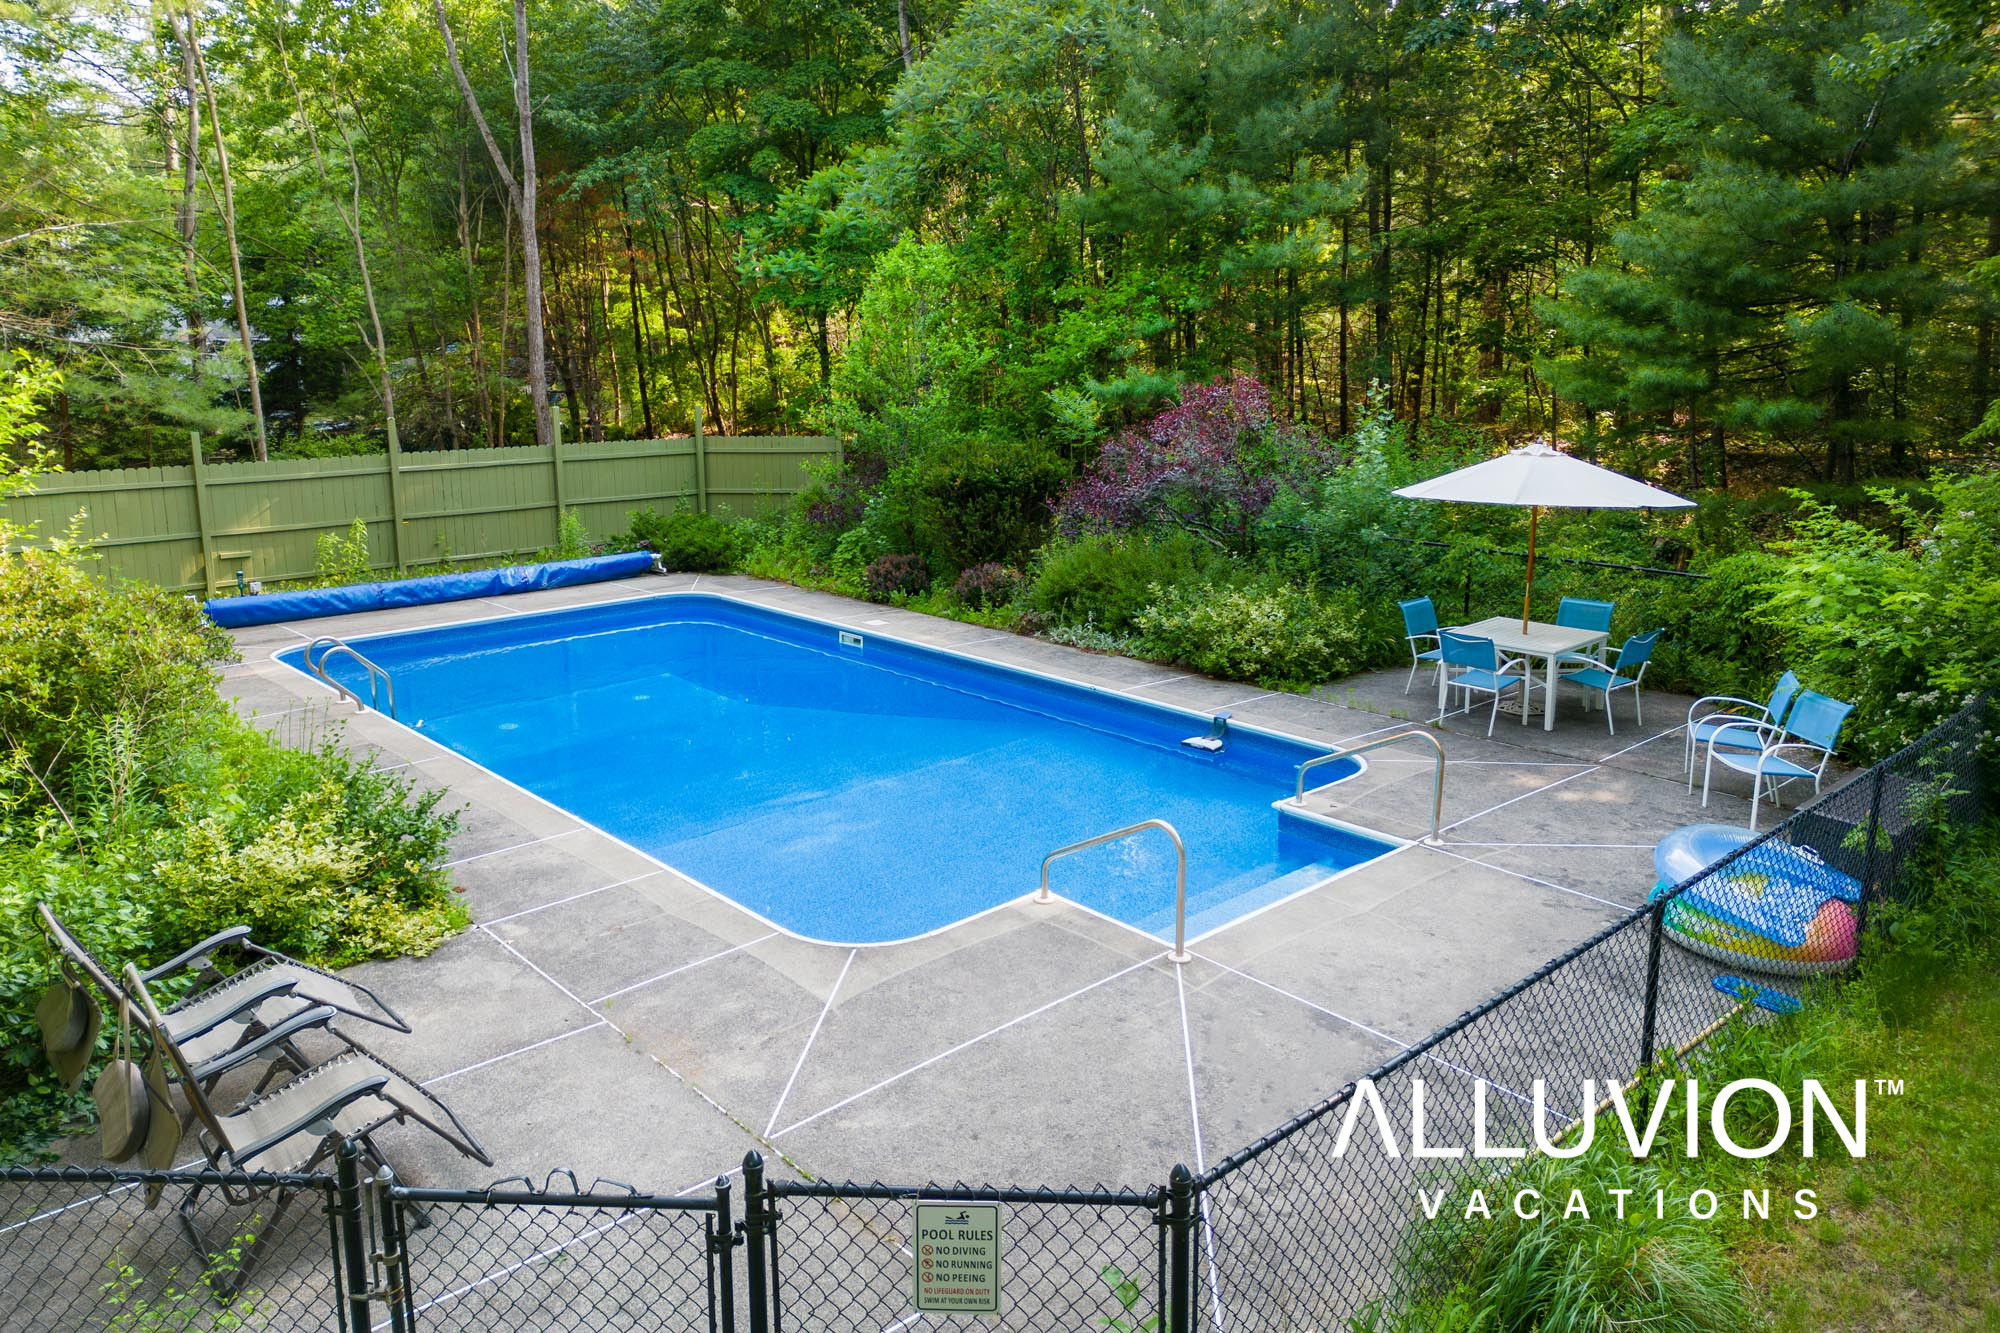 Find serenity at Alluvion Vacations’ Private Getaway Airbnb Cabin with a Pool near Hudson, NY